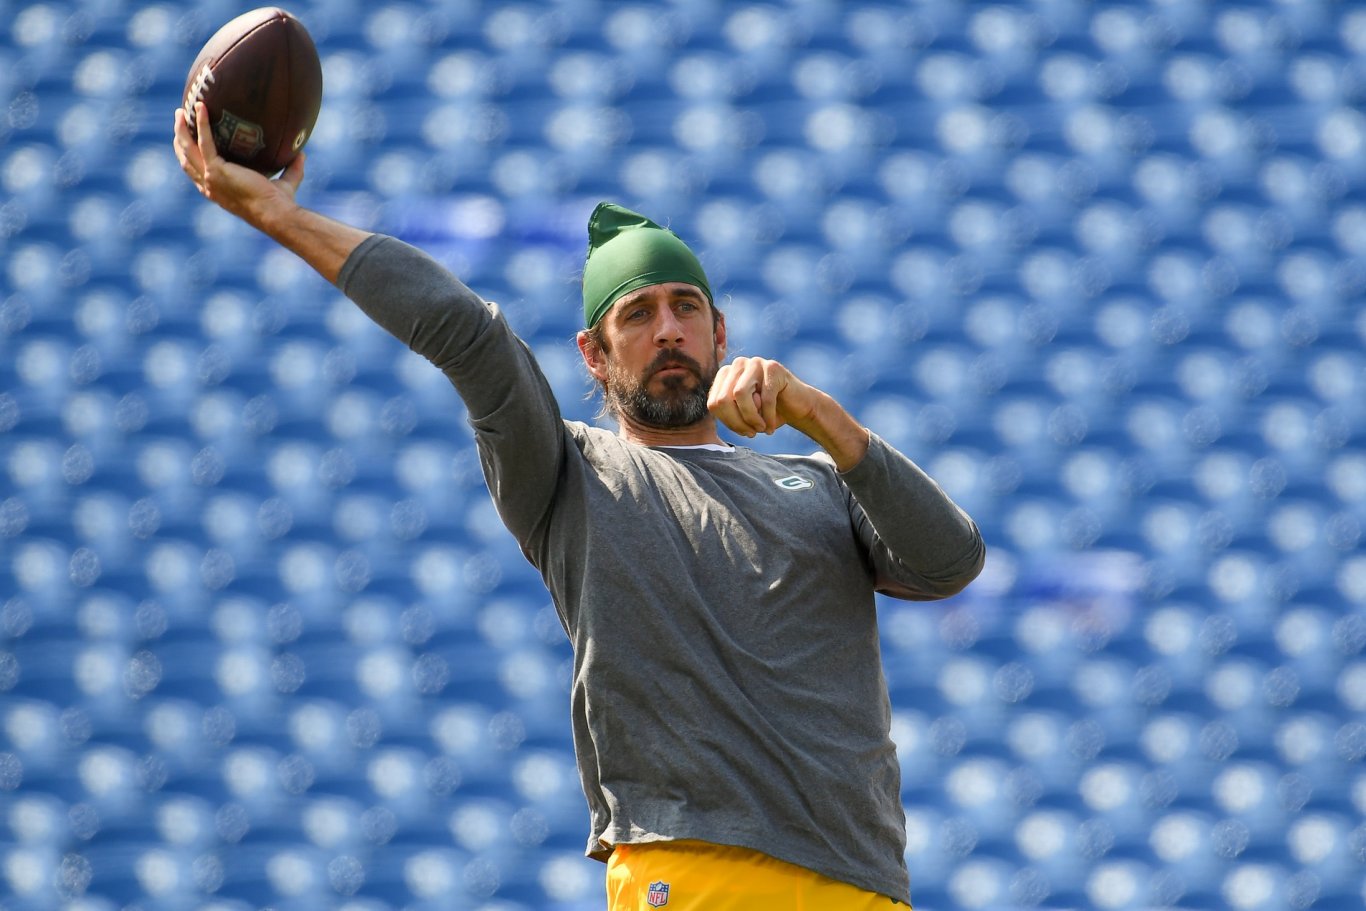 I was walking into the unknown': Aaron Rodgers speaks publicly